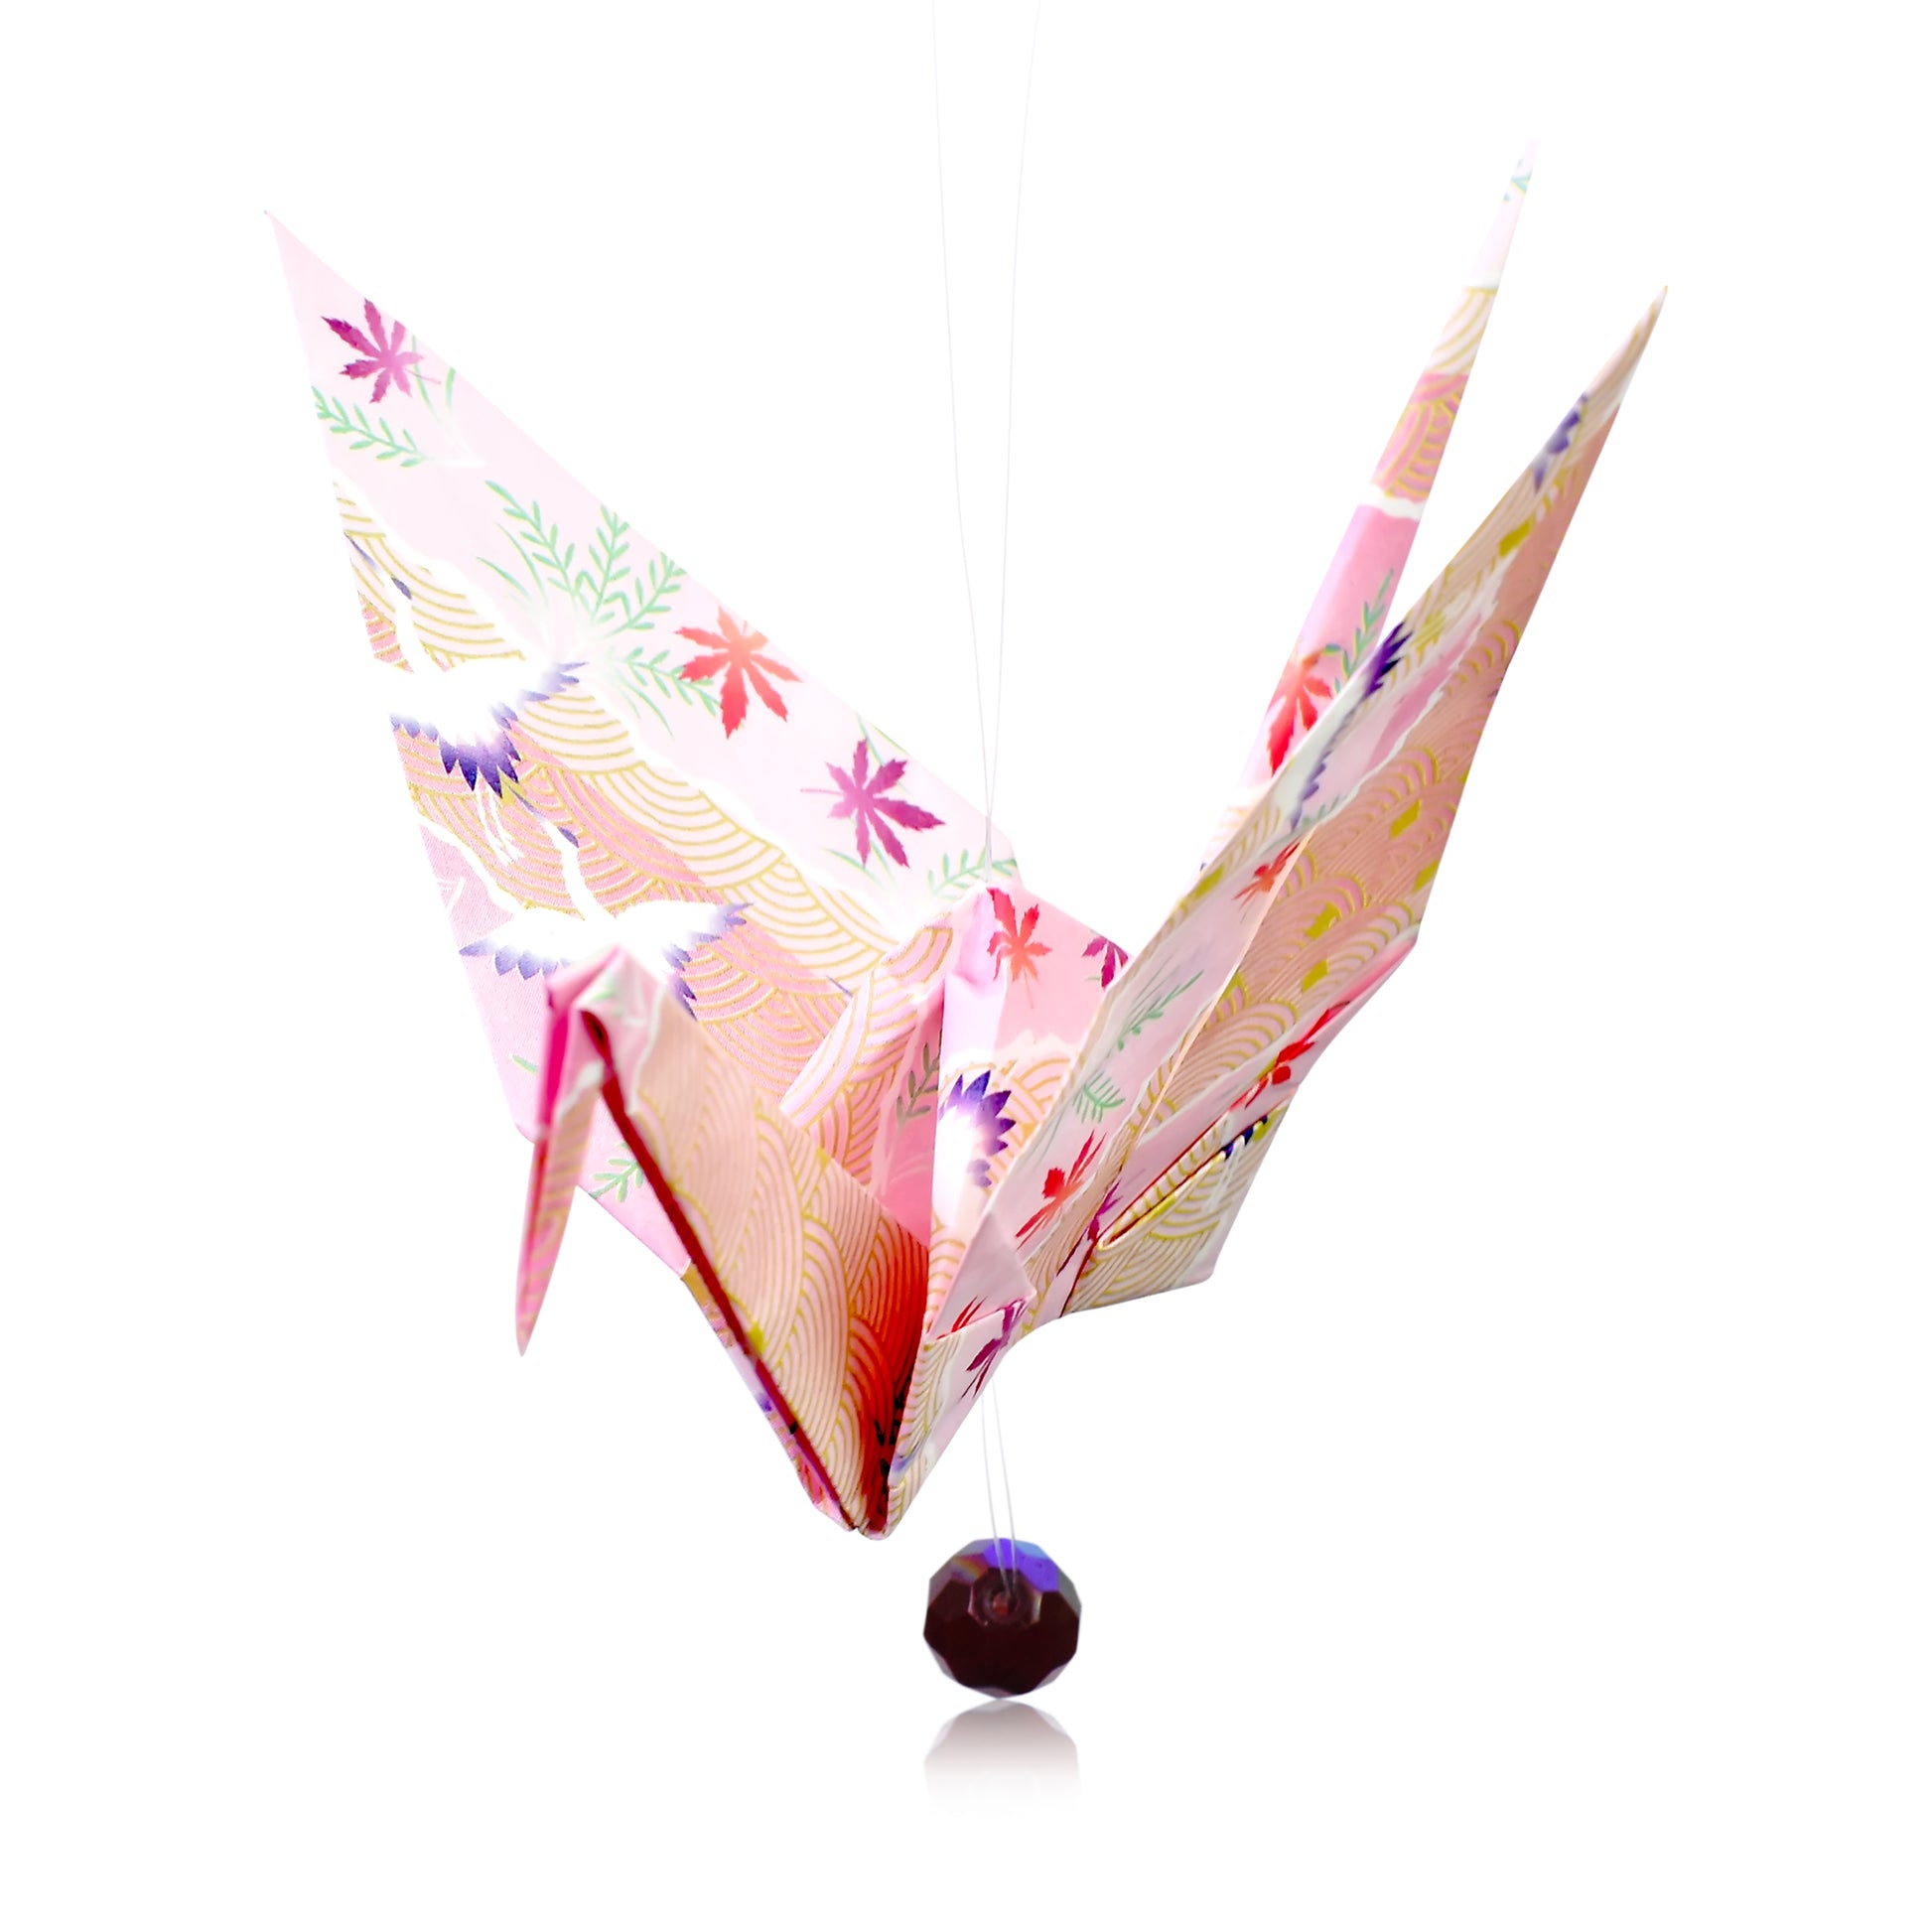 Give the Perfect Birthday Gift with Origami Cranes: January Birthstone